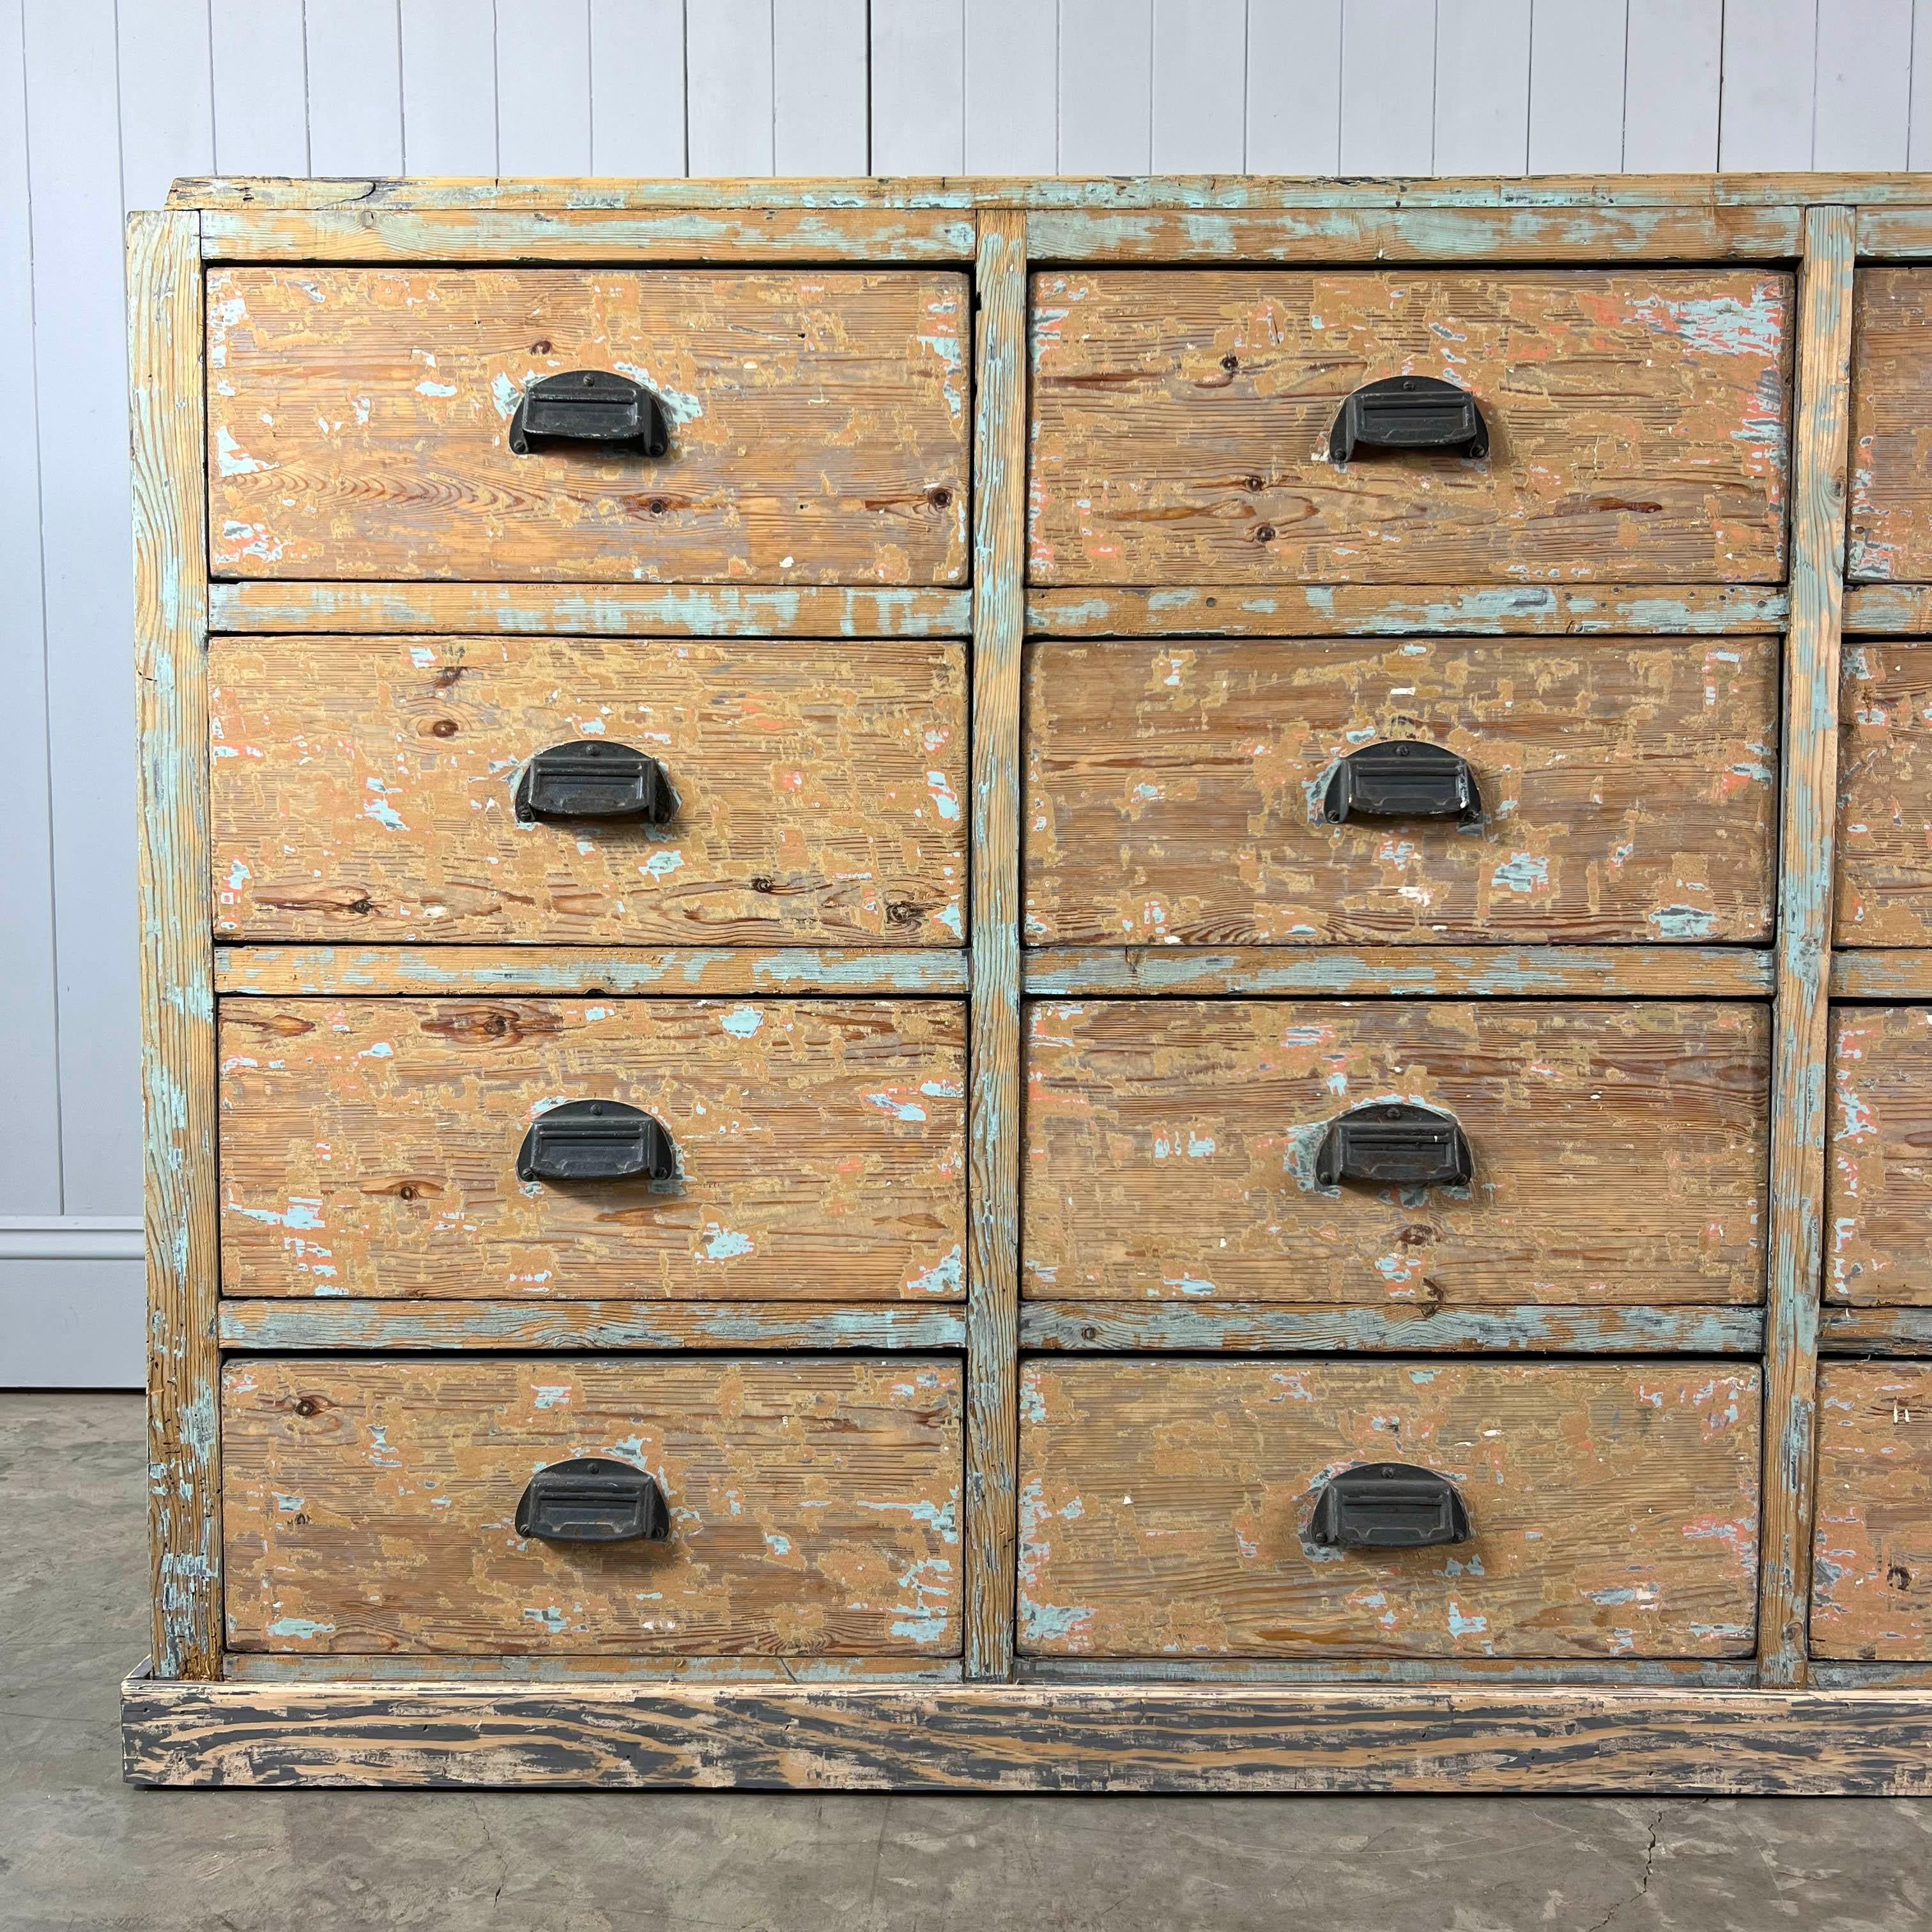 This huge antique bank of drawers was sourced from a factory in Avignon, South of France, circa 1900-1920. It has 20 drawers in total! 

It has a few bumps and knocks but is generally in good clean and sturdy condition. circa 1900-1920 this